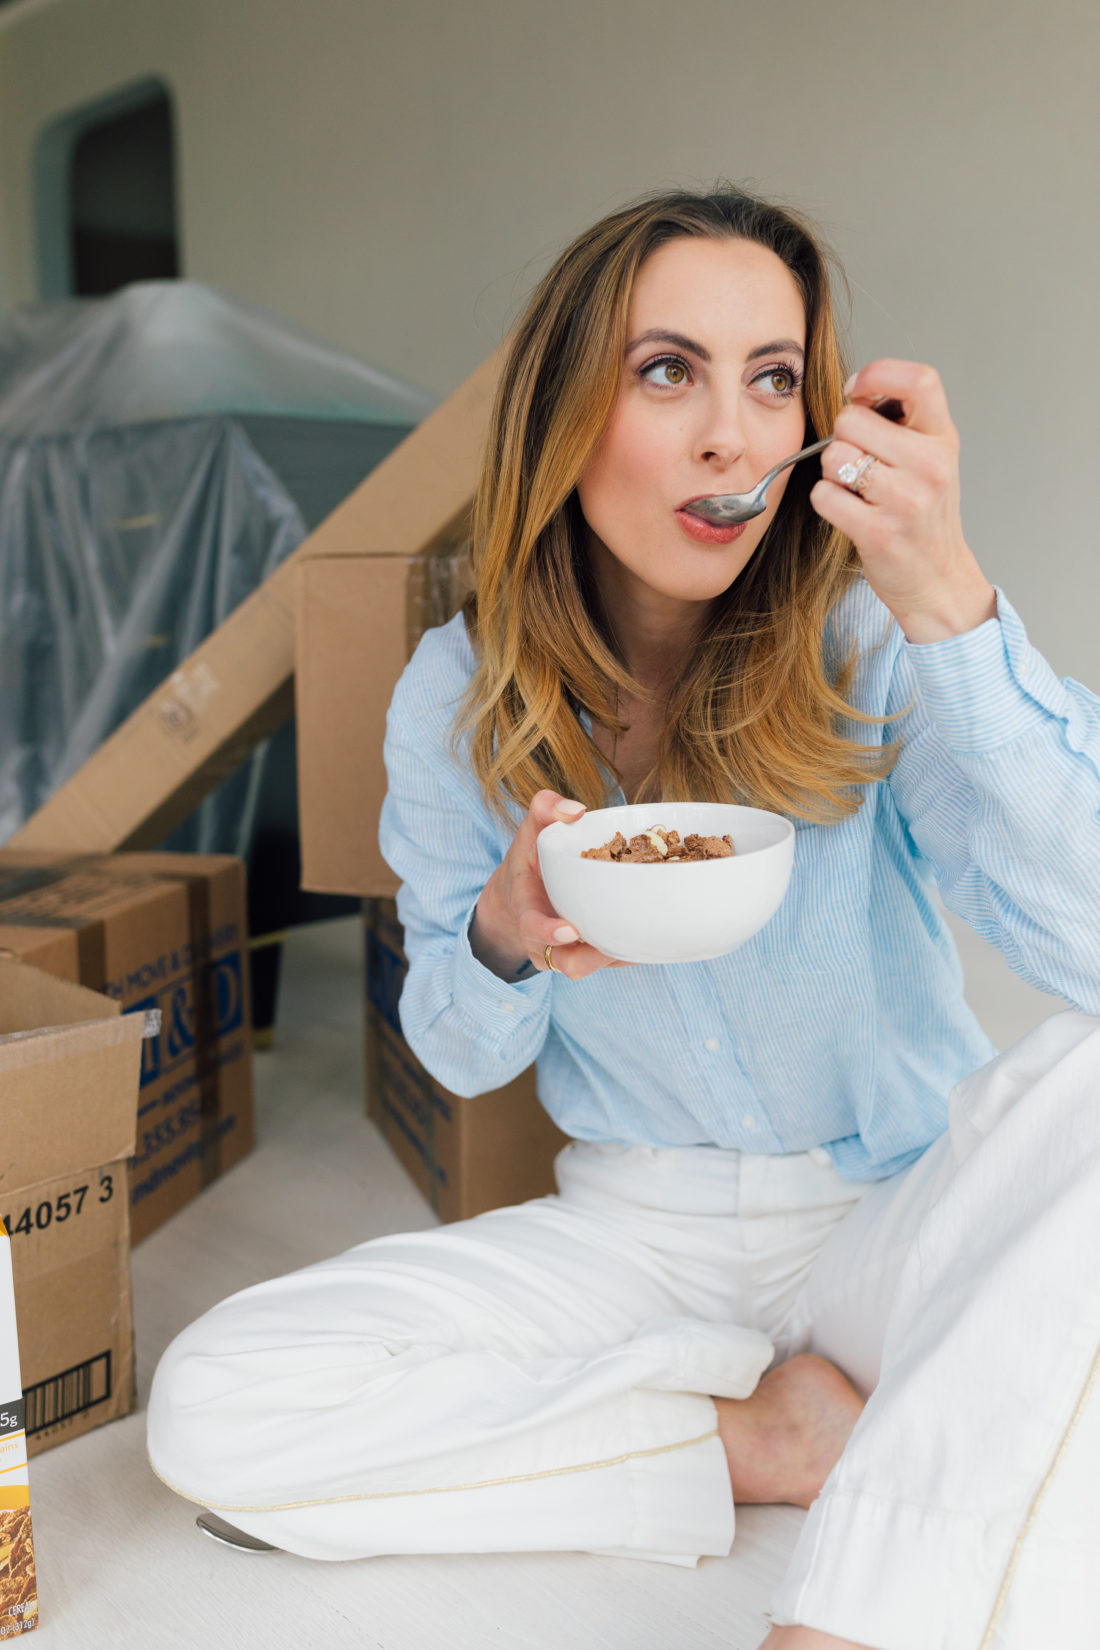 Eva Amurri Martino of Happily Eva After sits on the floor of her newly renovated historic home in Connecticut, enjoying a bowl of Special K